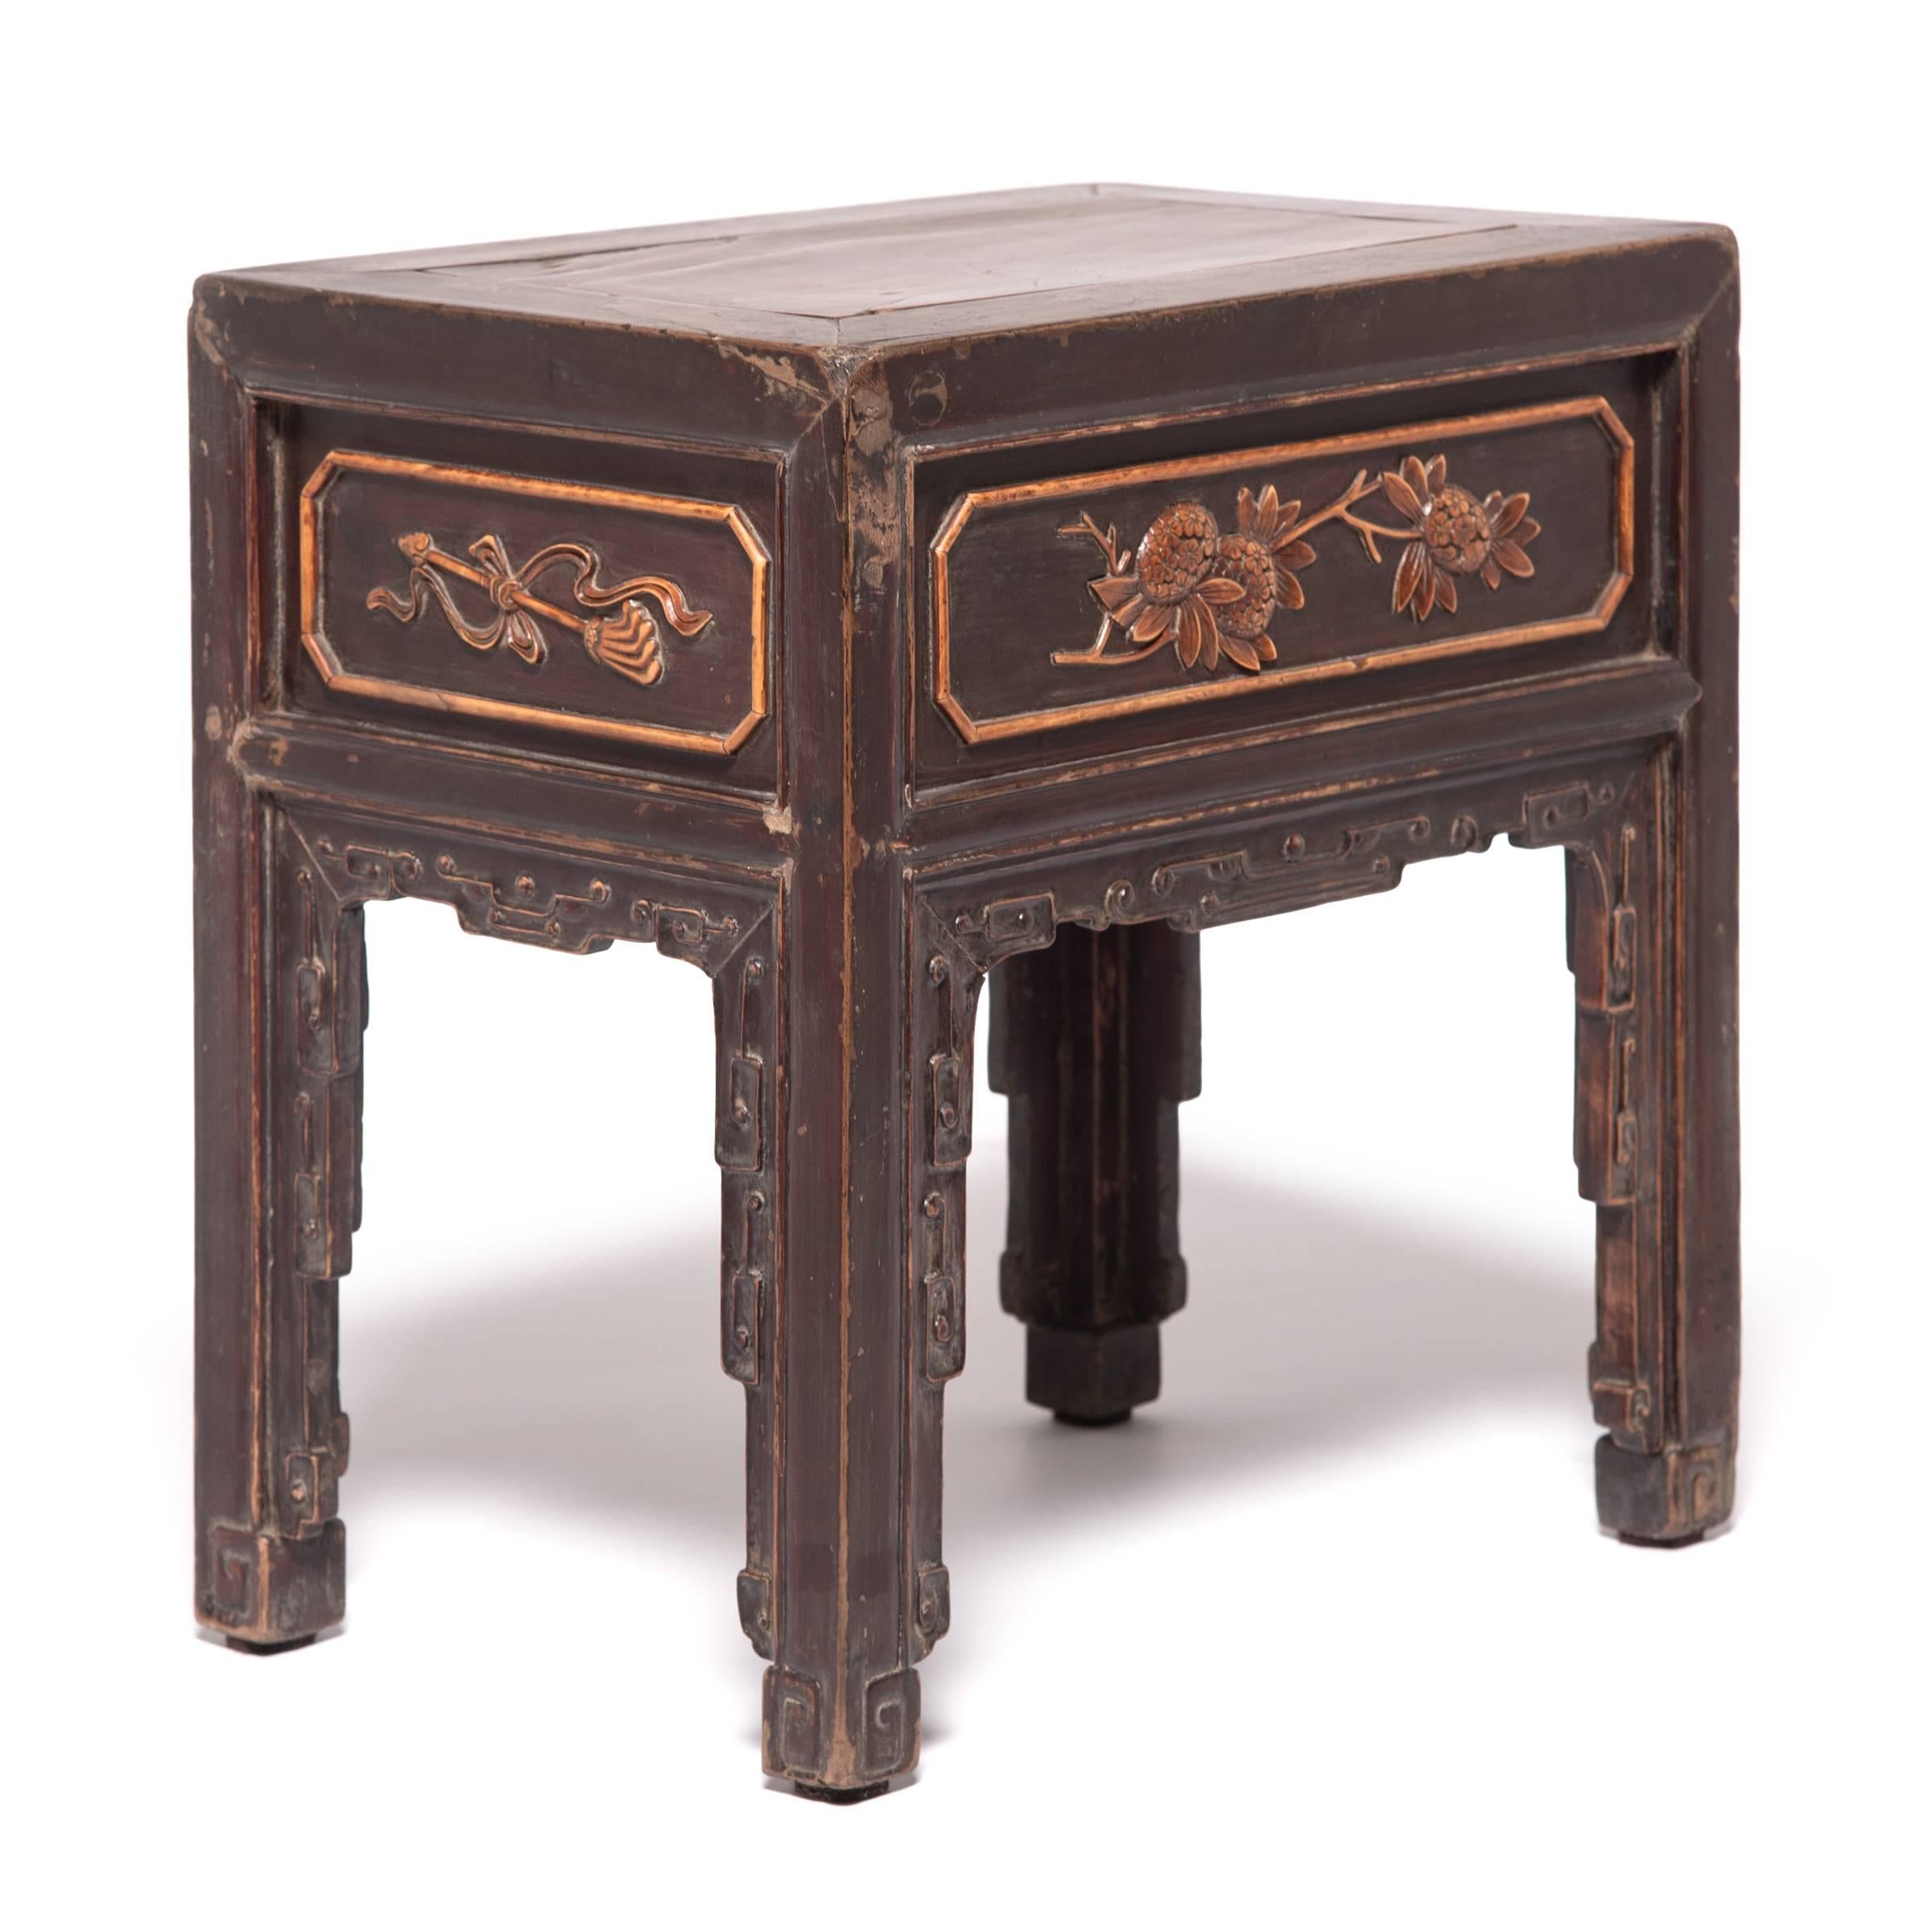 Carved Petite Chinese Display Table with Boxwood Inlay, c. 1850